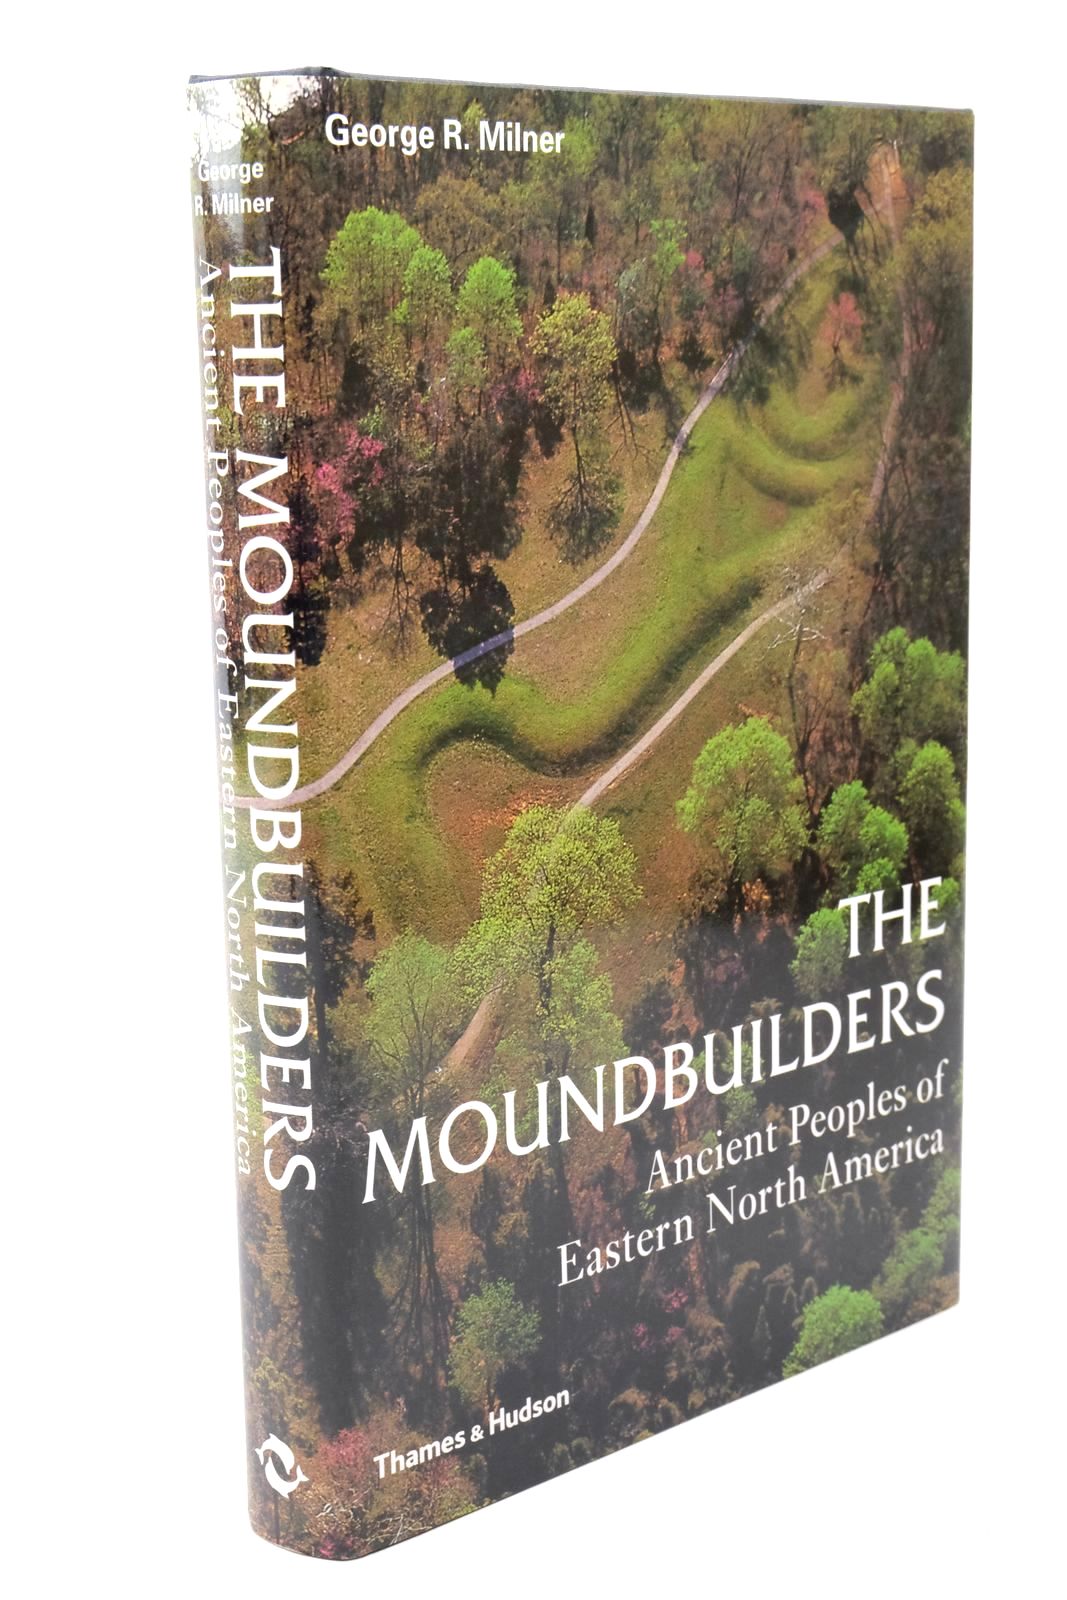 Photo of THE MOUNDBUILDERS- Stock Number: 1322596